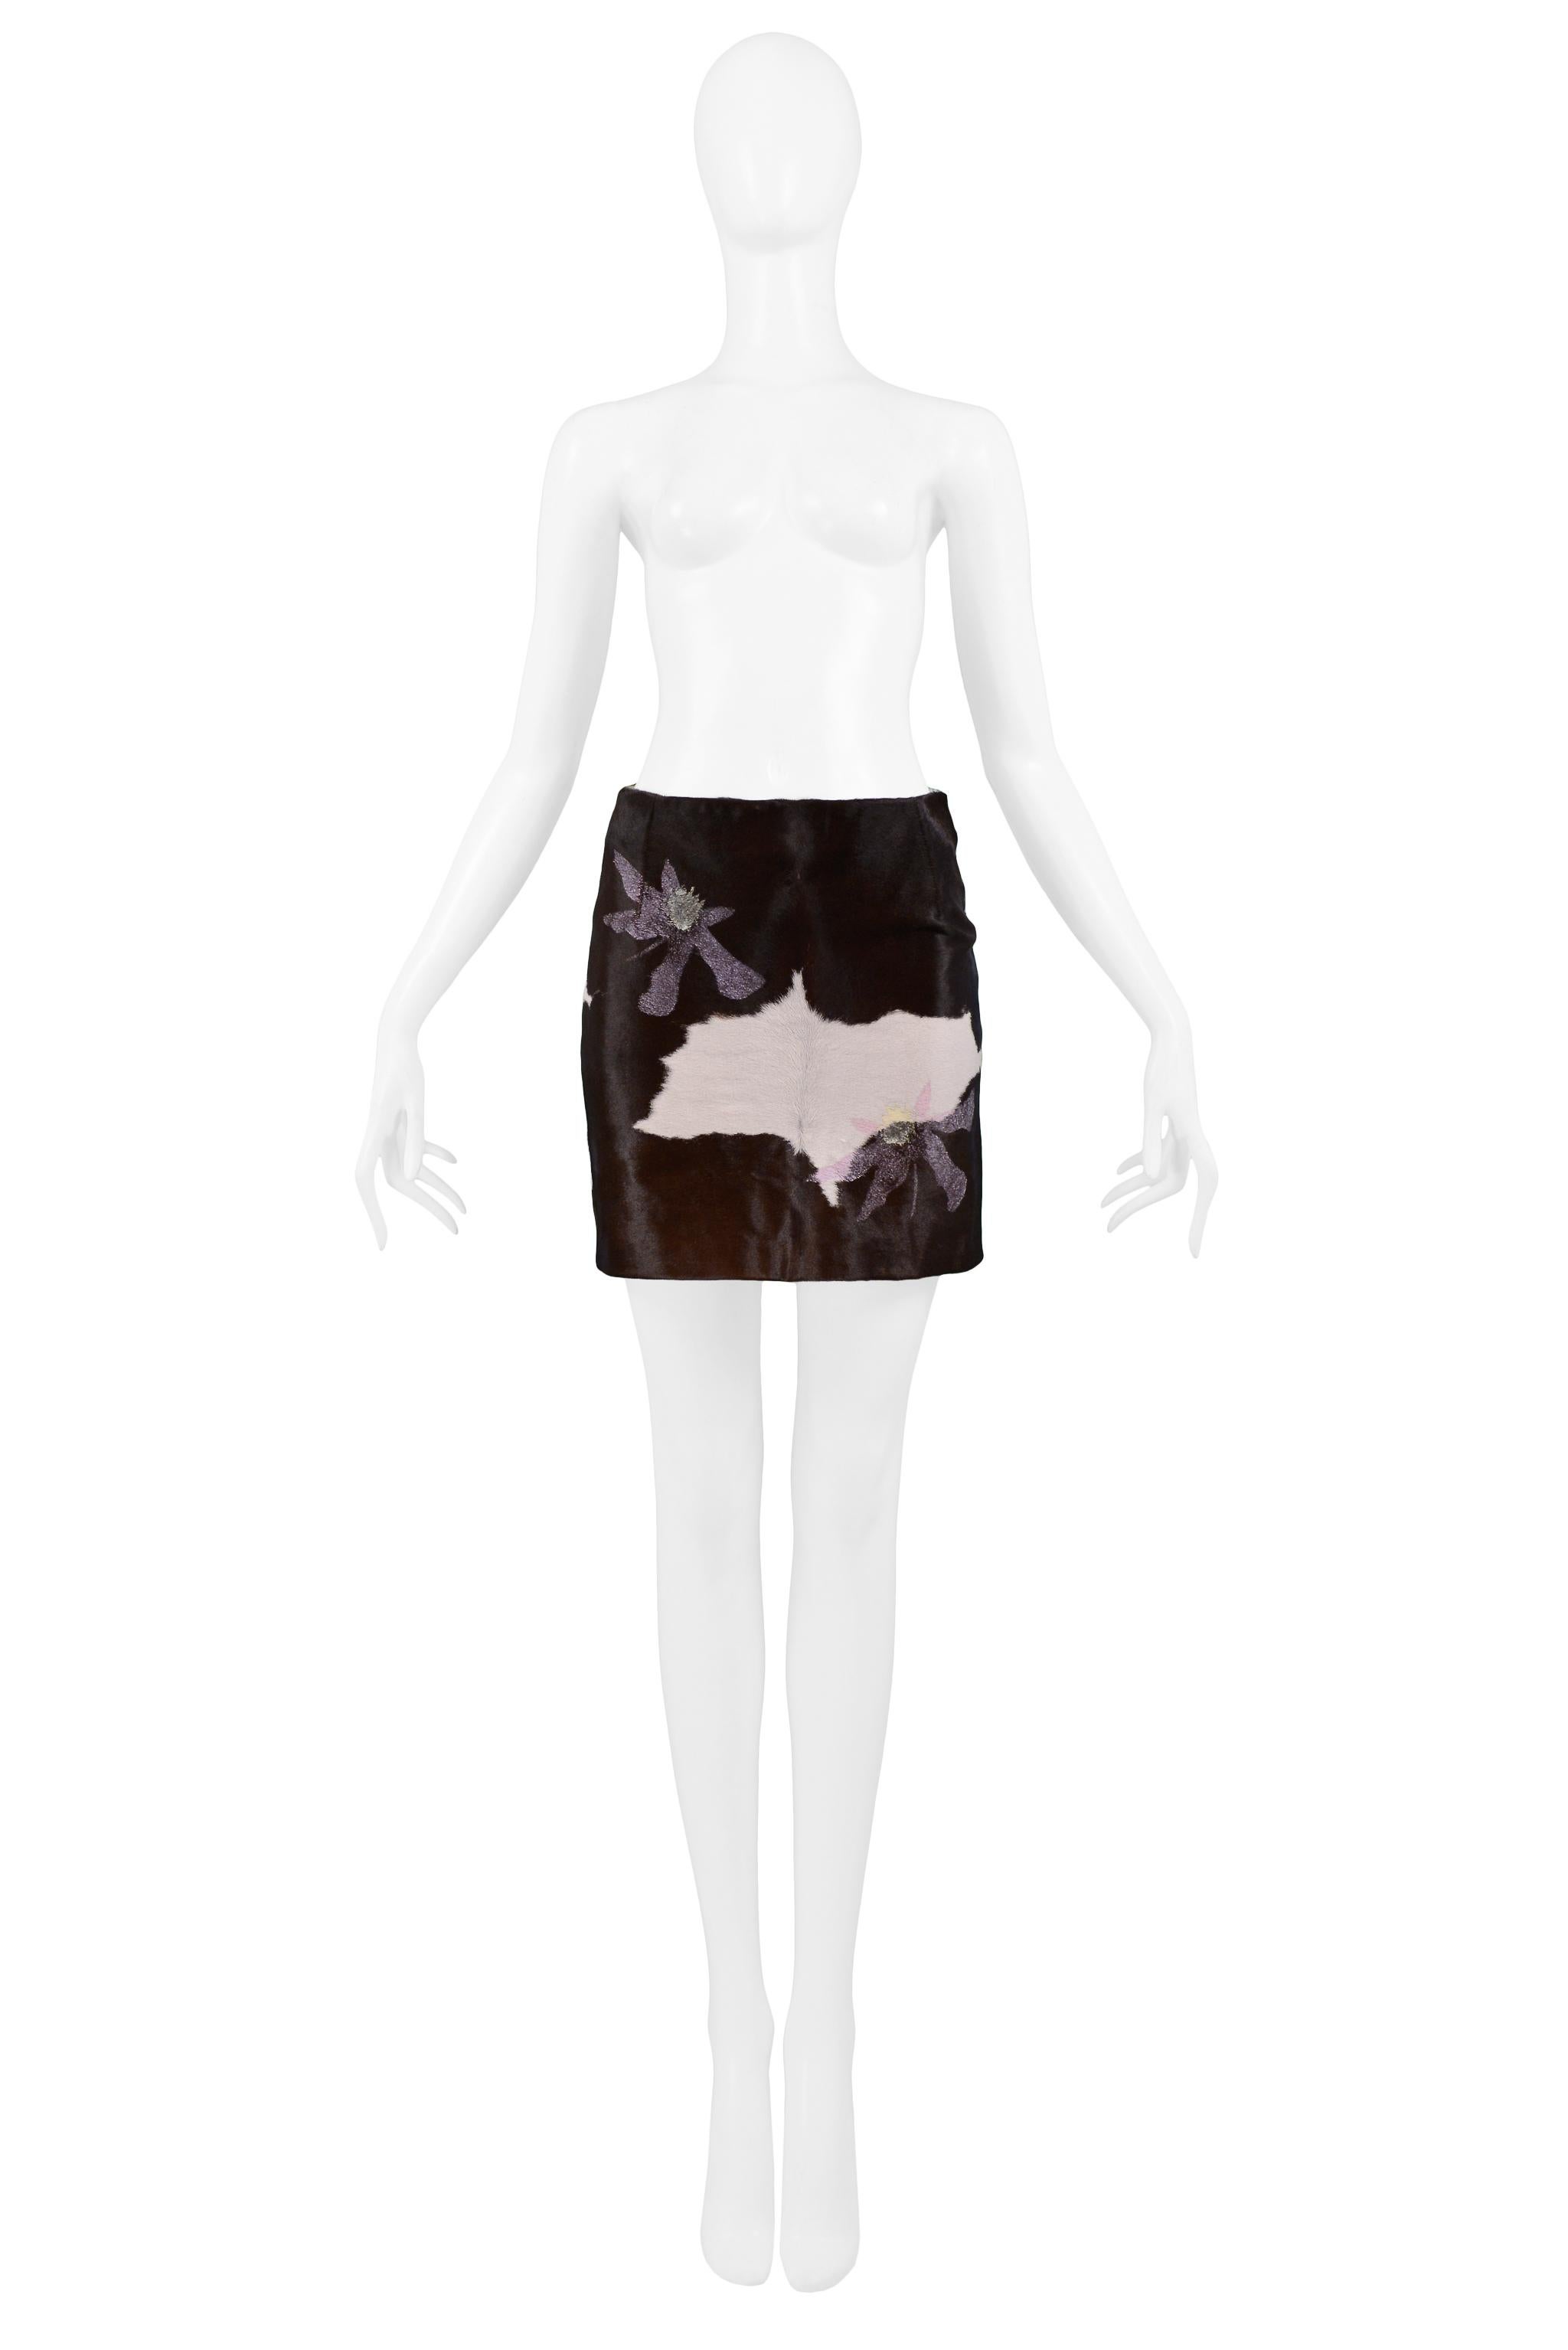 Resurrection Vintage is excited to offer a vintage Versace brown and cream calf hair mini skirt featuring painted lilac flowers and a center back zipper.

Versace
Measurements: Waist 24